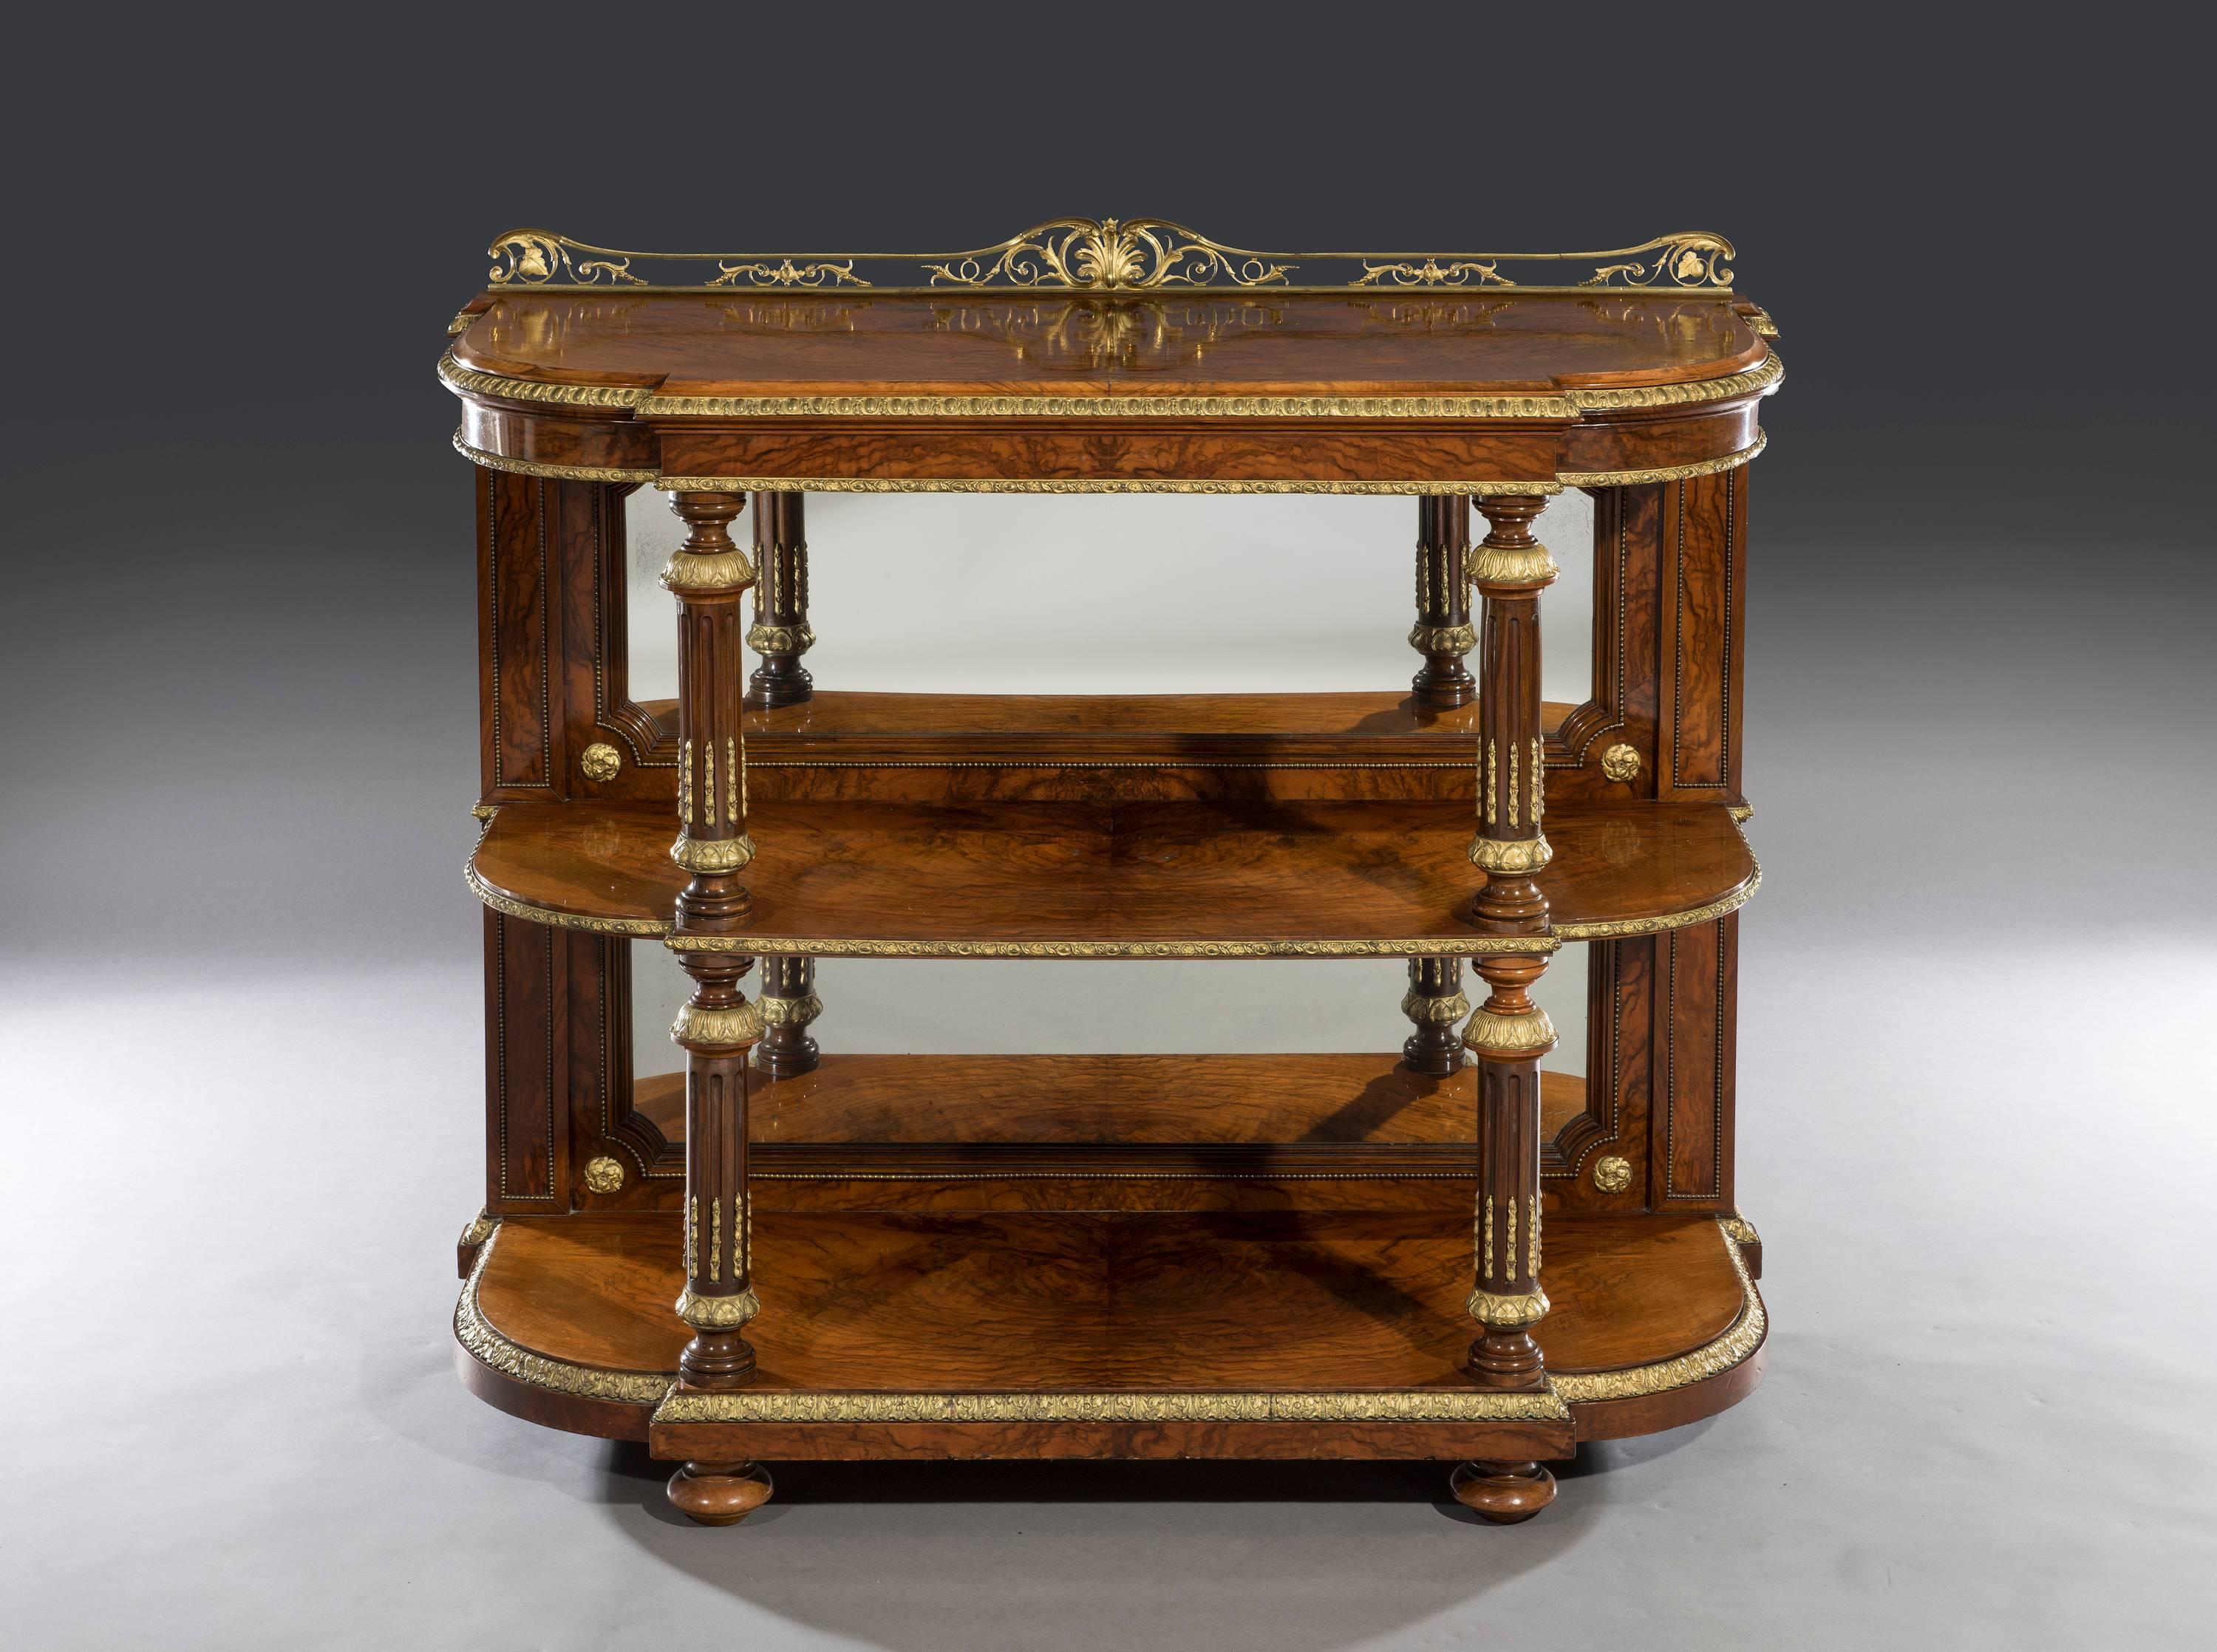 The burr walnut breakfront top with a bevelled edge is fitted with a highly decorative shaped gallery above a burr walnut veneered frieze. The inset mirrored backs are surmounted on shaped walnut and brass beaded mouldings with gilt-metal mounts to